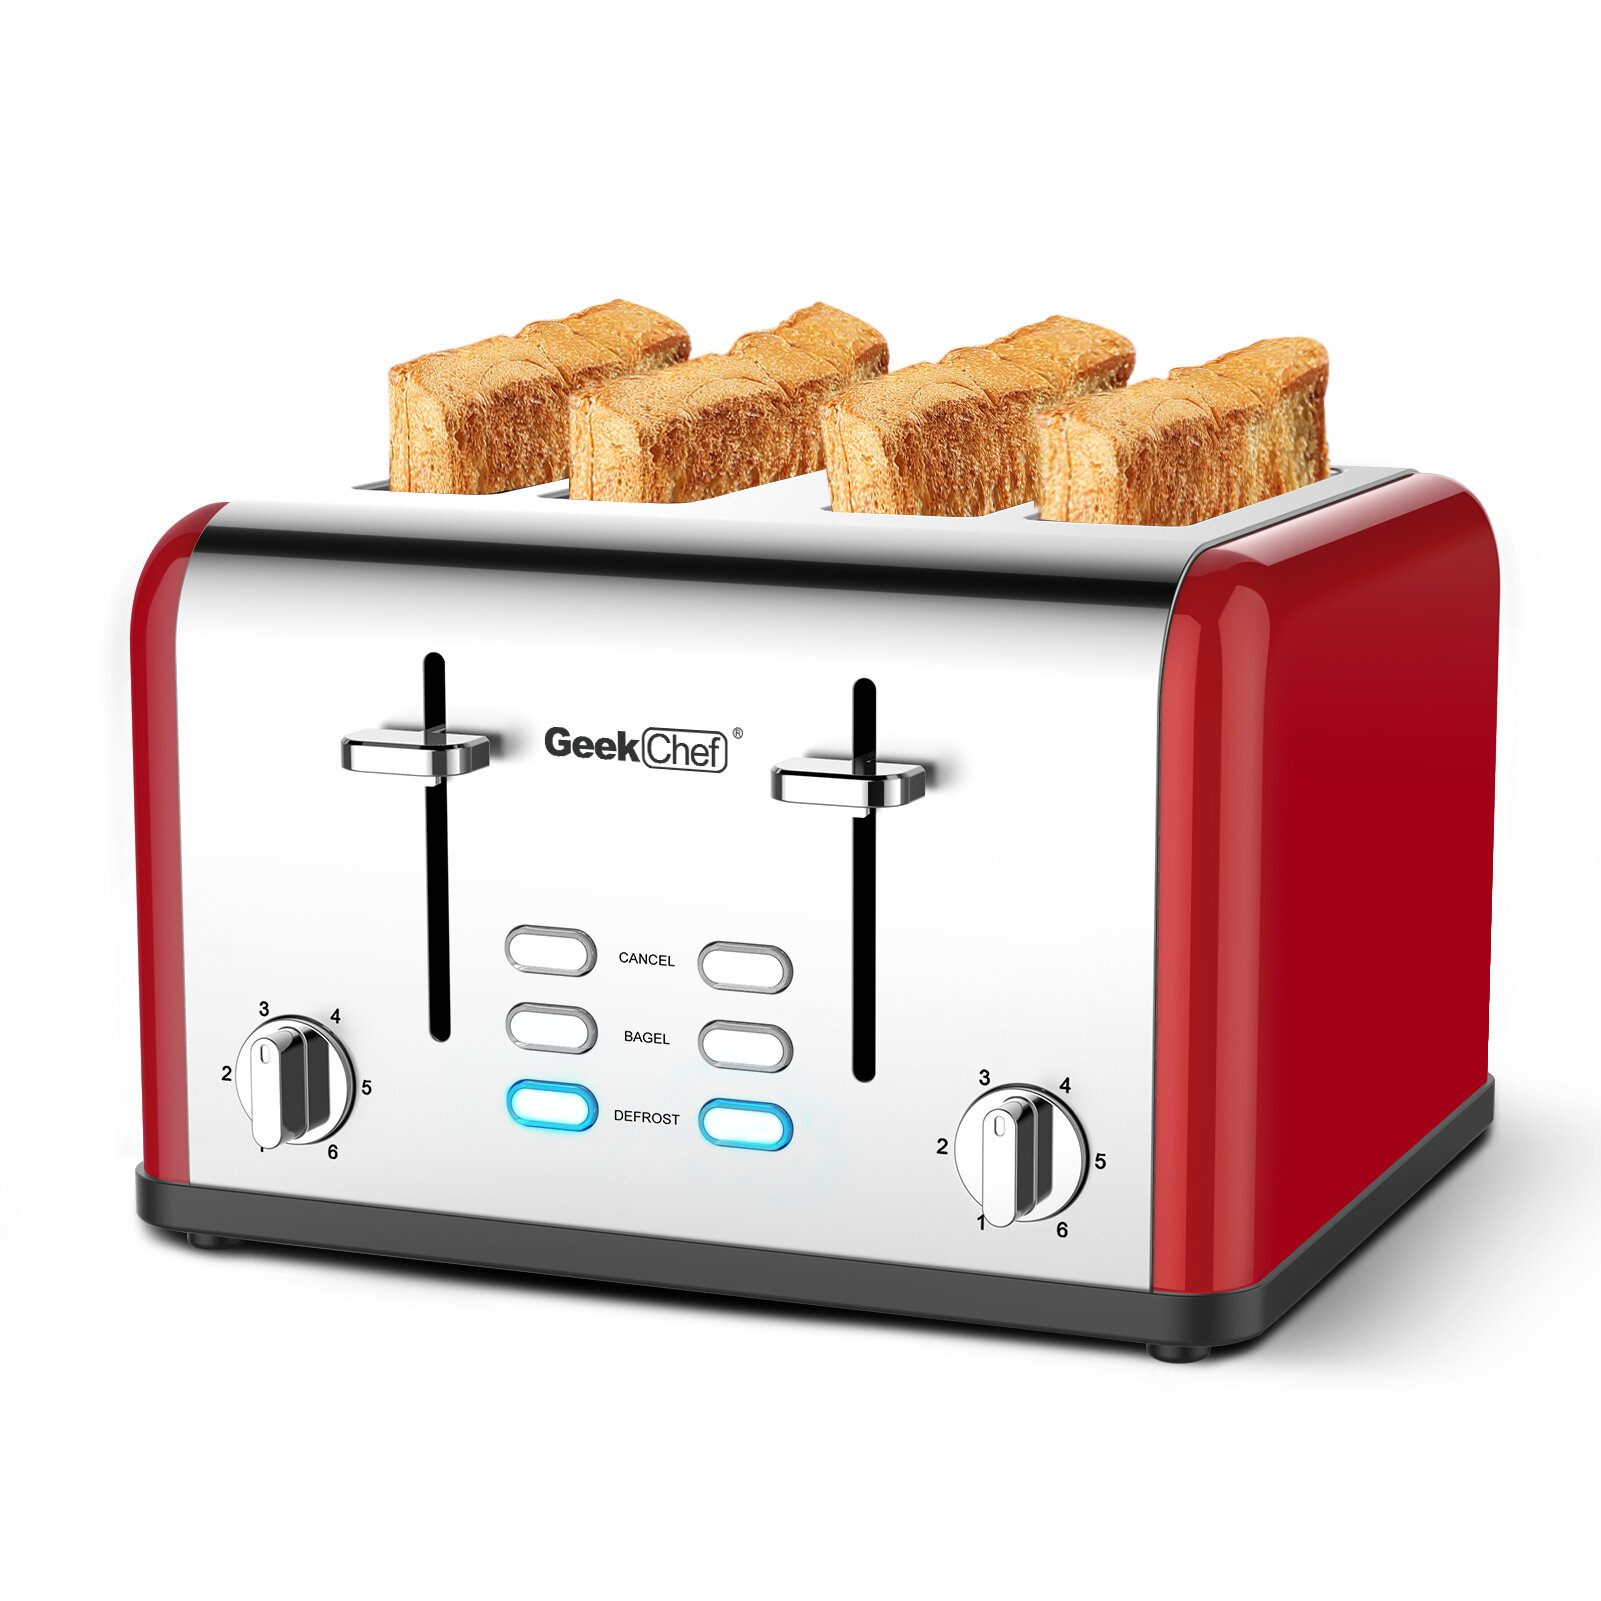 Lifease 4 Slice Toaster, 4 Extra Wide Slots, Best Rated Prime Retro Bagel  Toaster With 6 Bread Shade Settings, Defrost,bagel,cancel Function,  Removable Crumb Tray, Stainless Steel Toaster, 1500w (silver&red)